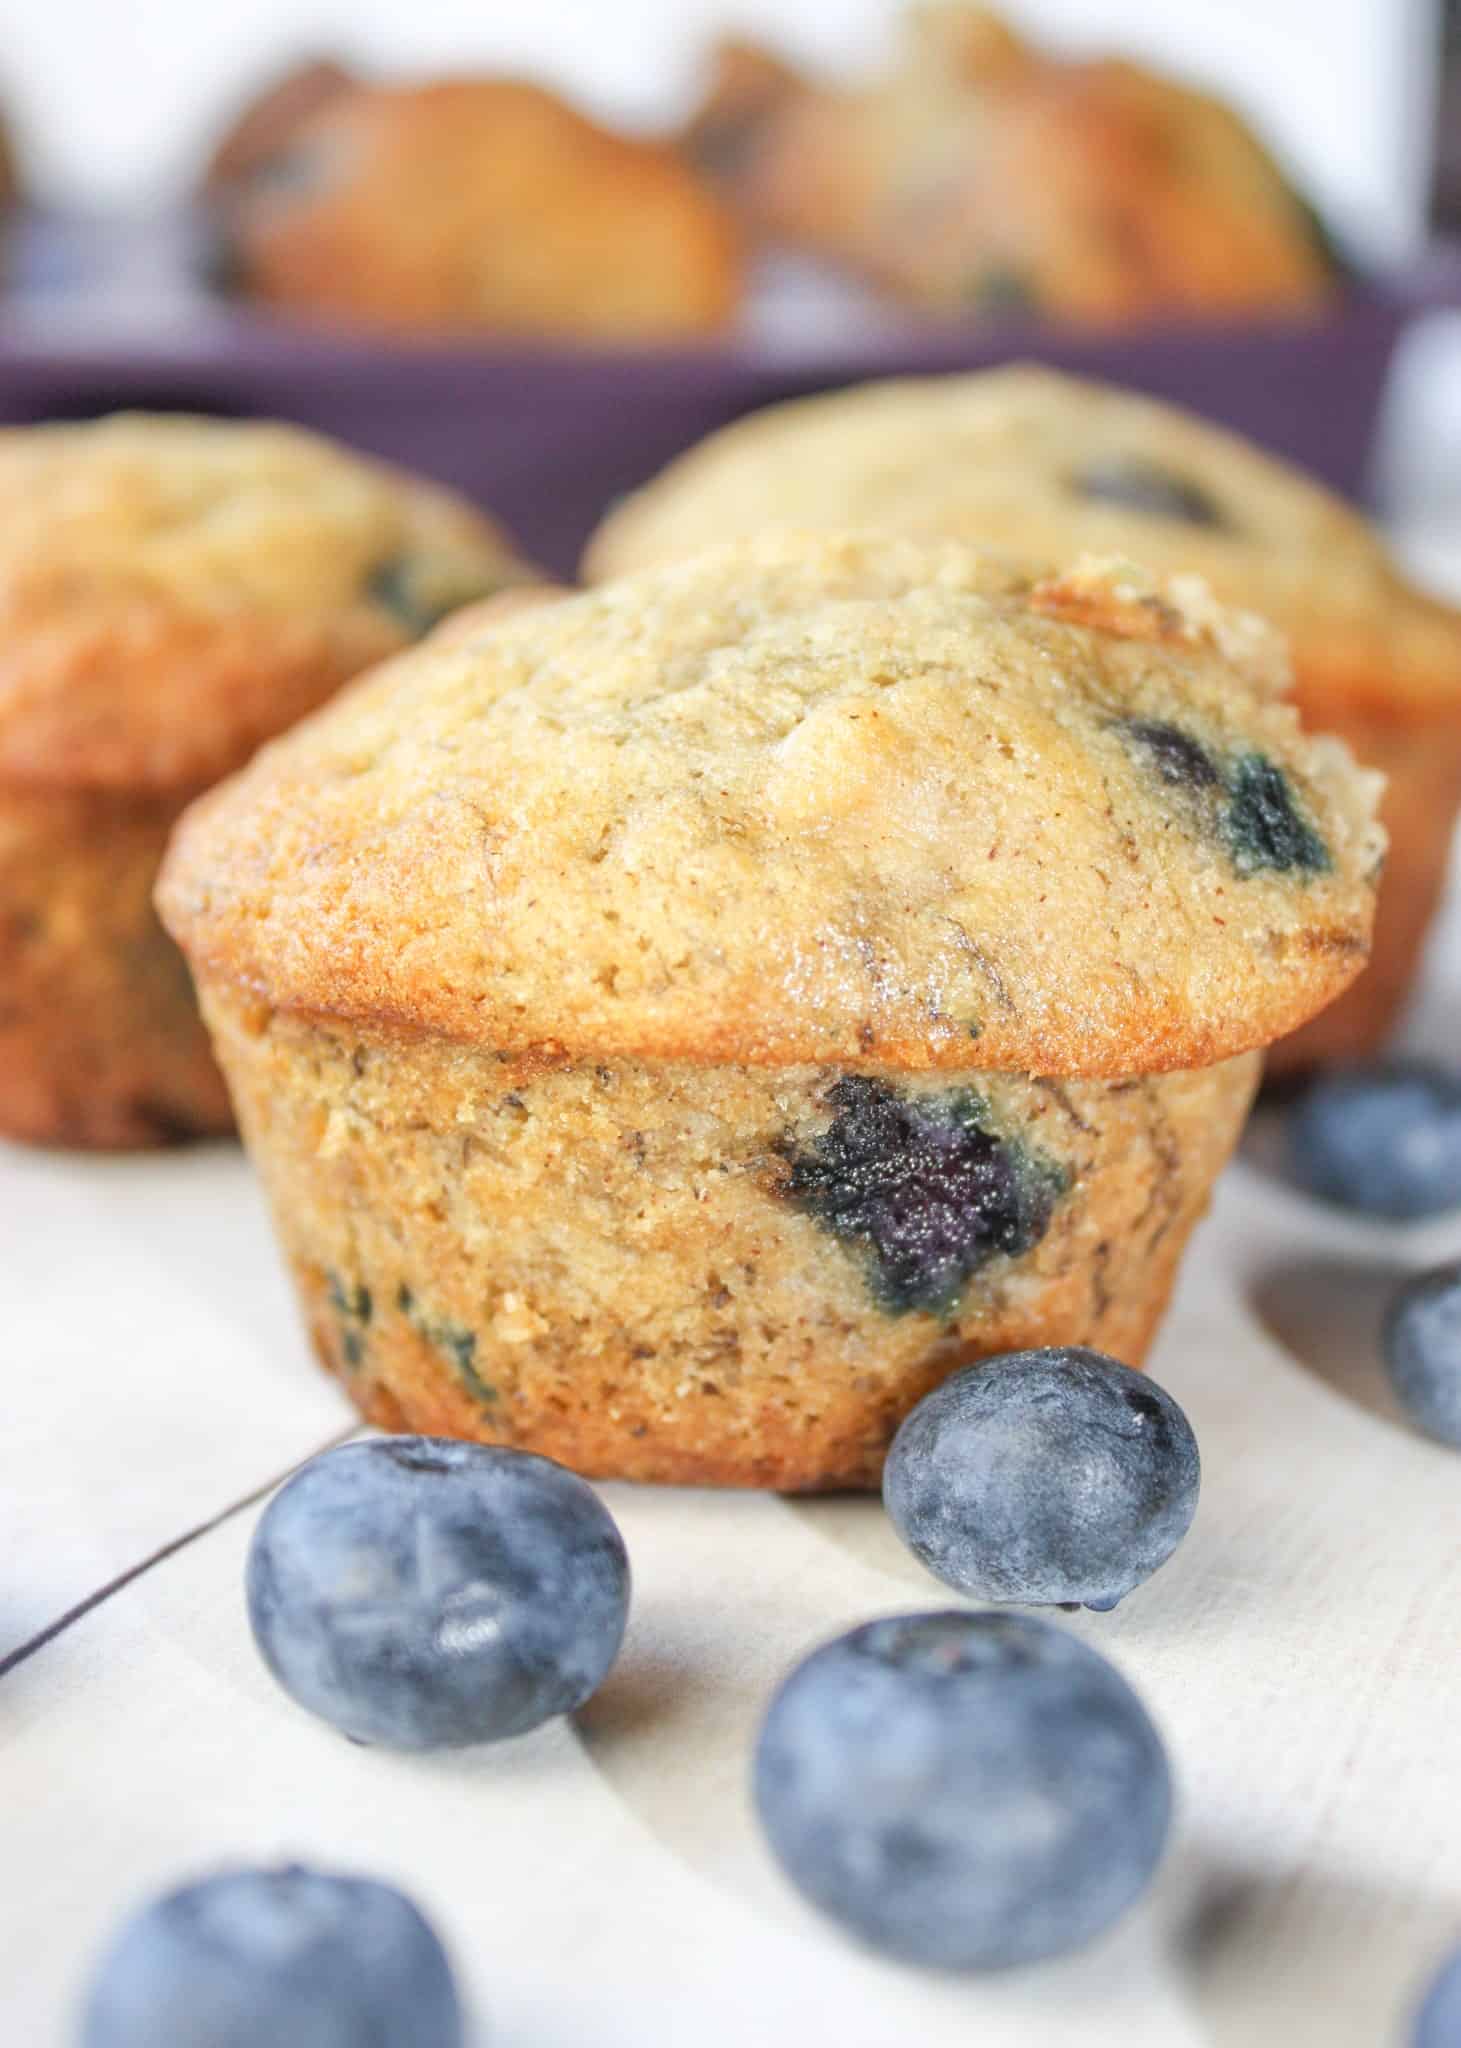 Blueberry Banana Muffins are a tasty seasonal twist on traditional banana muffins.  This moist and delicious gluten free snack is loaded with fresh blueberries.